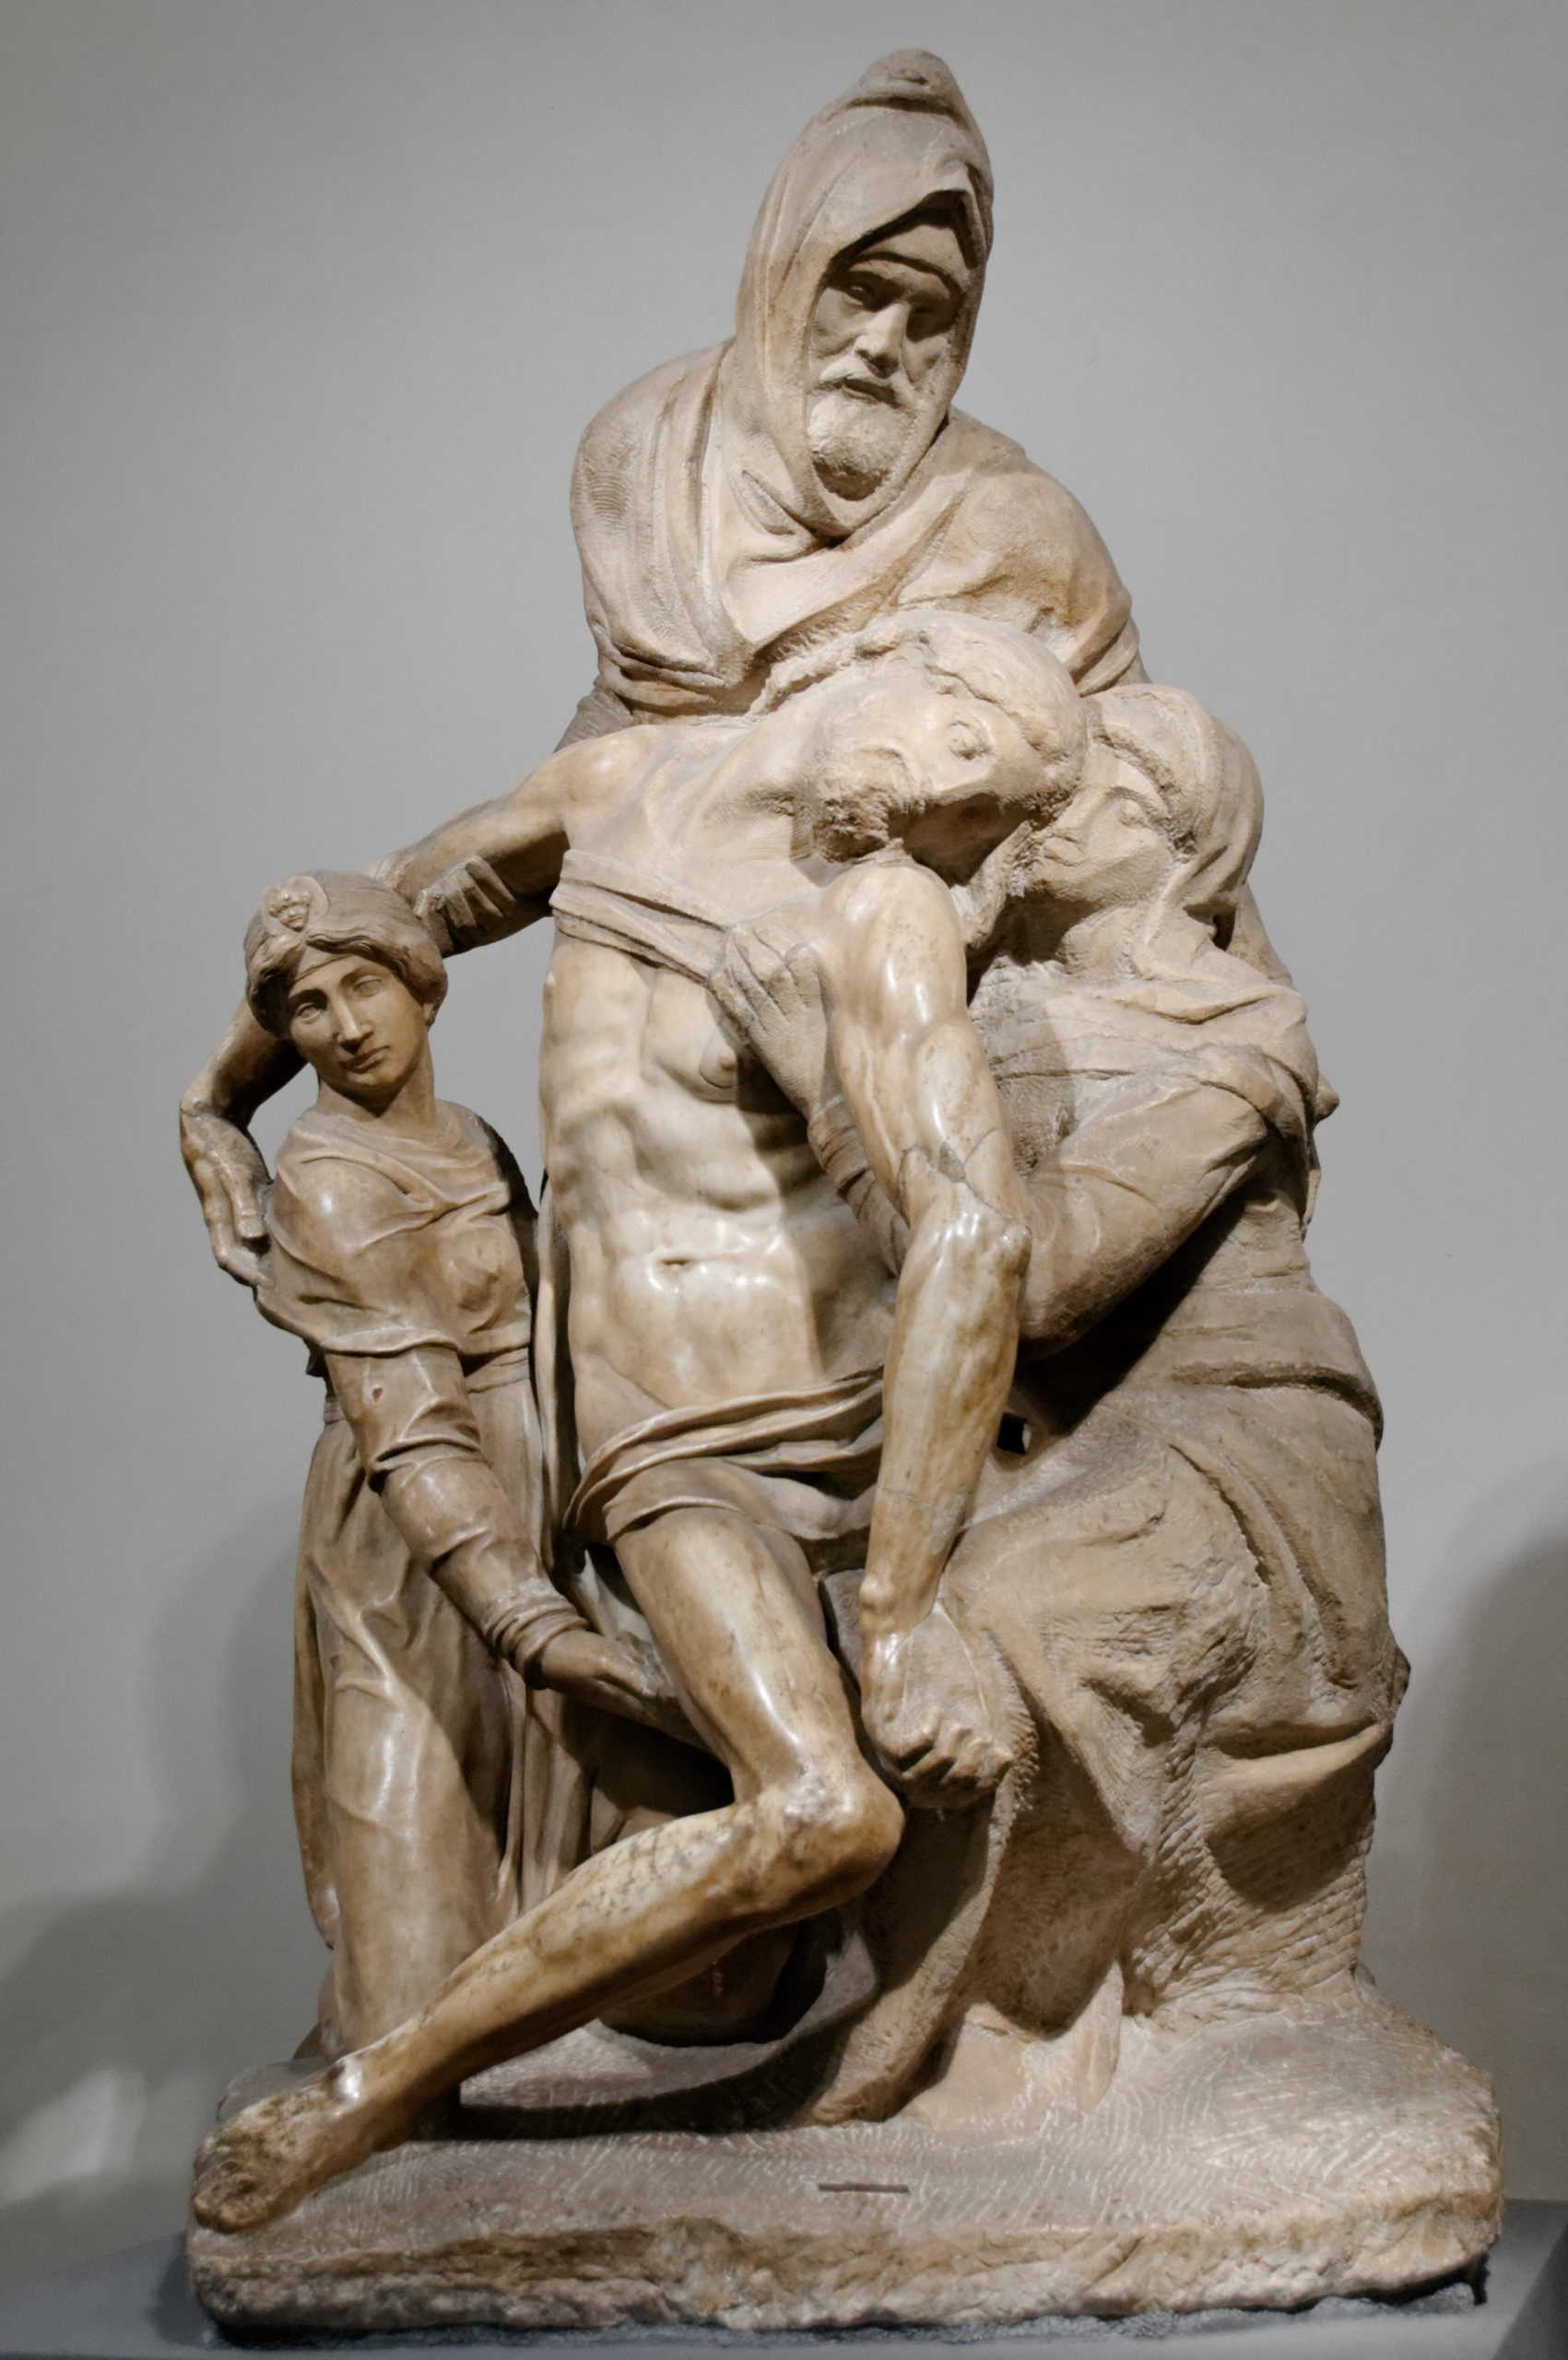 Michelangelo, Deposition (The Florentine Pietà), c. 1547-55, marble, 2.26 m high (Museo dell'Opera del Duomo, Florence, photo: Marie-Lan Nguyen, CC-BY 2.5)